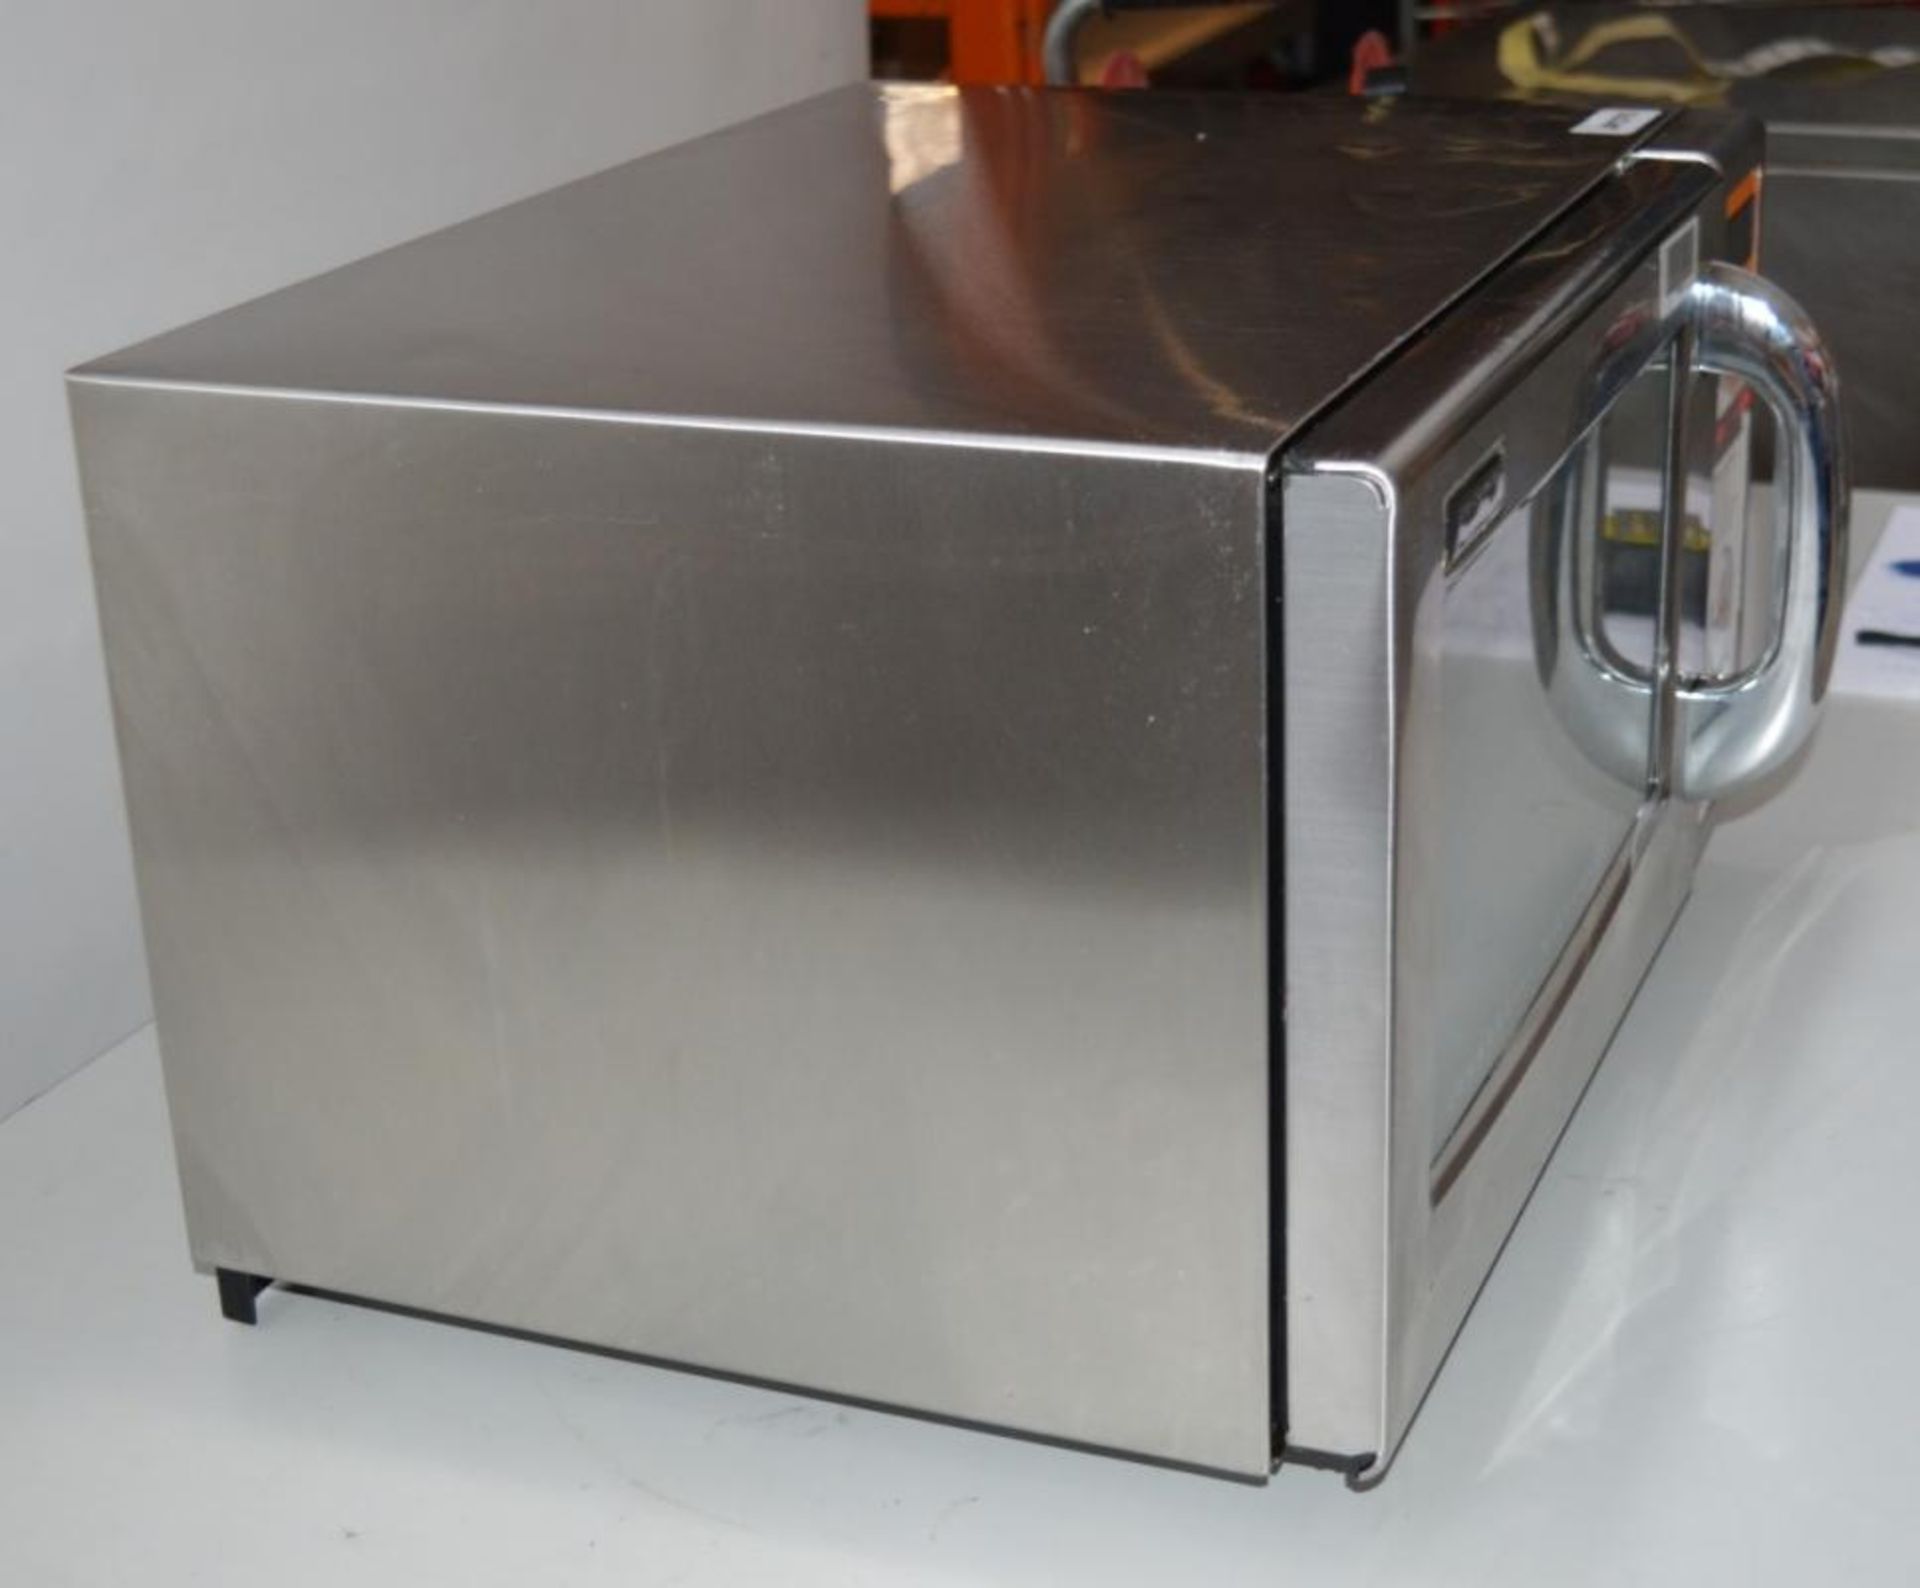 1 x iWave MiWAVE1000 Automated Foodservice Solution - Stainless Steel 1000w Catering Microwave - Image 6 of 14